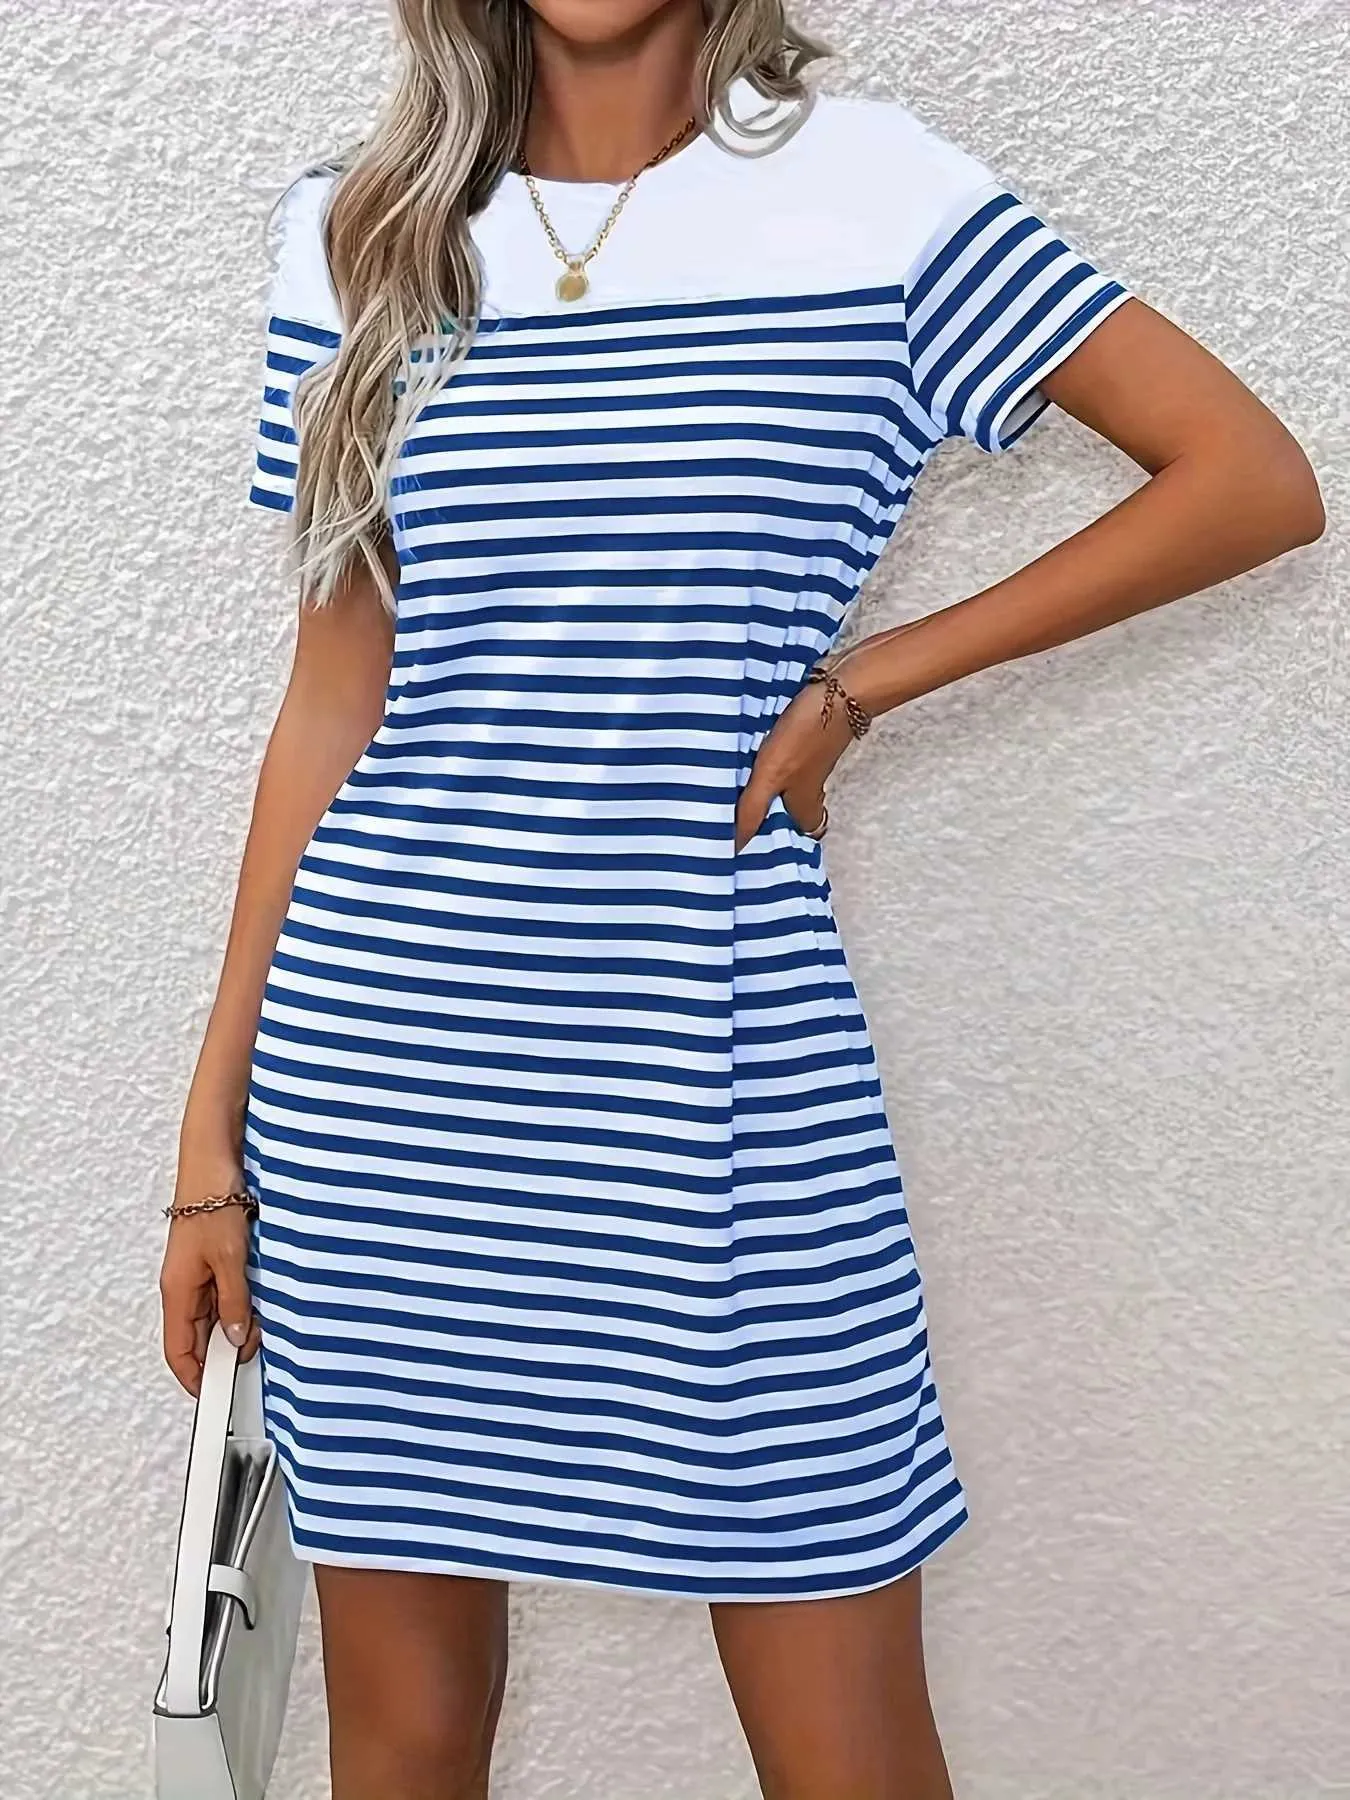 Basic Casual Dresses Leisure fashion classic striped short sleeved solid color matching T-shirt summer round neck dress womens blue Y240429